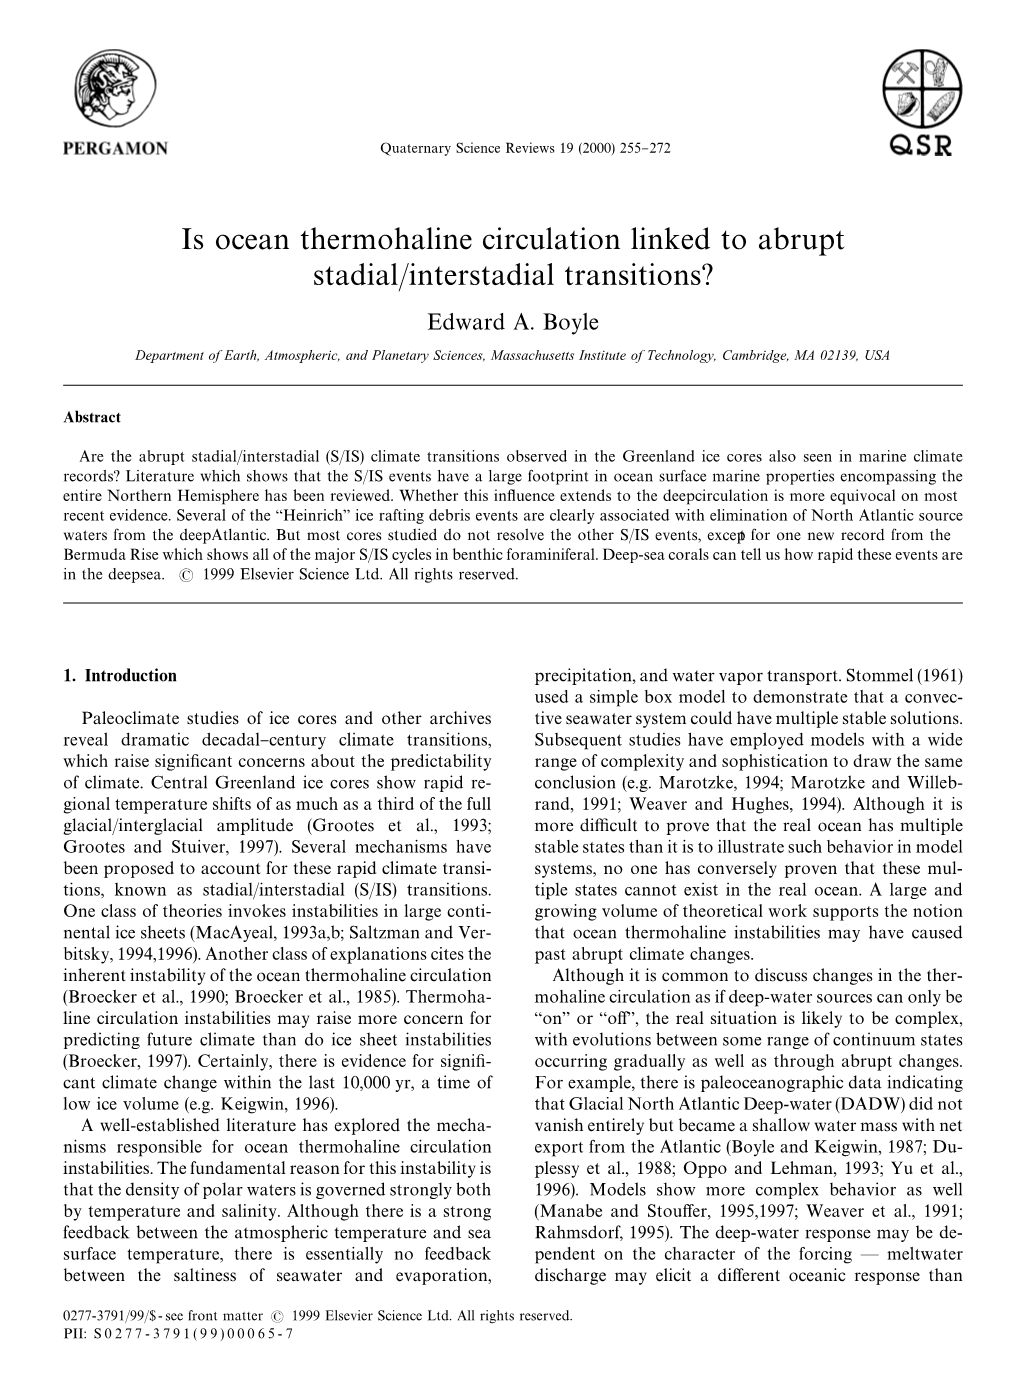 Is Ocean Thermohaline Circulation Linked to Abrupt Stadial/Interstadial Transitions? Edward A